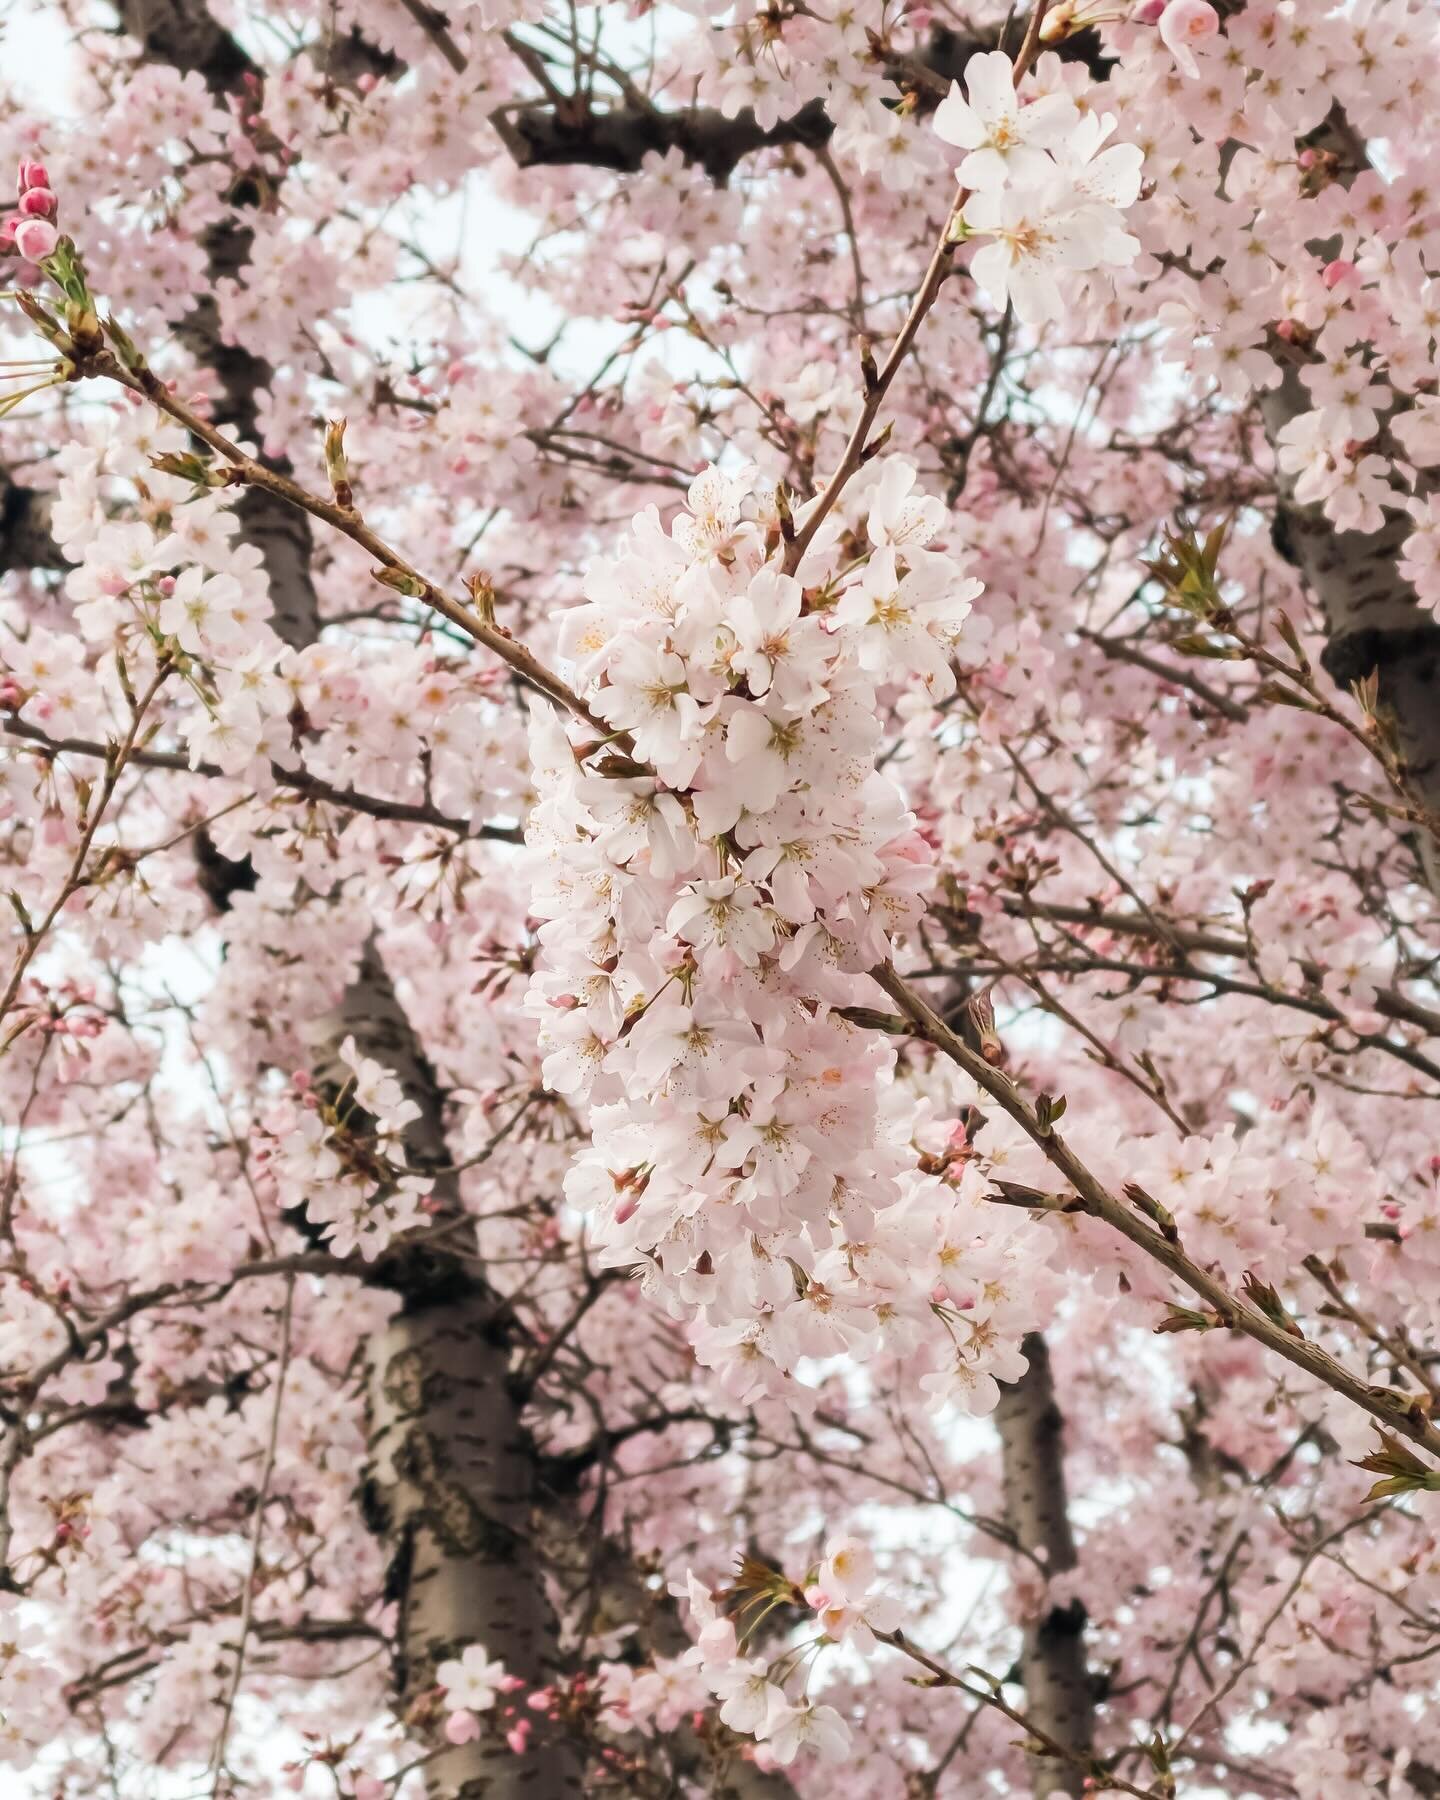 i&rsquo;ve been meaning to take my camera out for a walk during the day when the sun was out today, to capture the cherry blossoms. but work got in the way and i ended up being glued to my tiny laptop screen all day. met a tight deadline at work toda